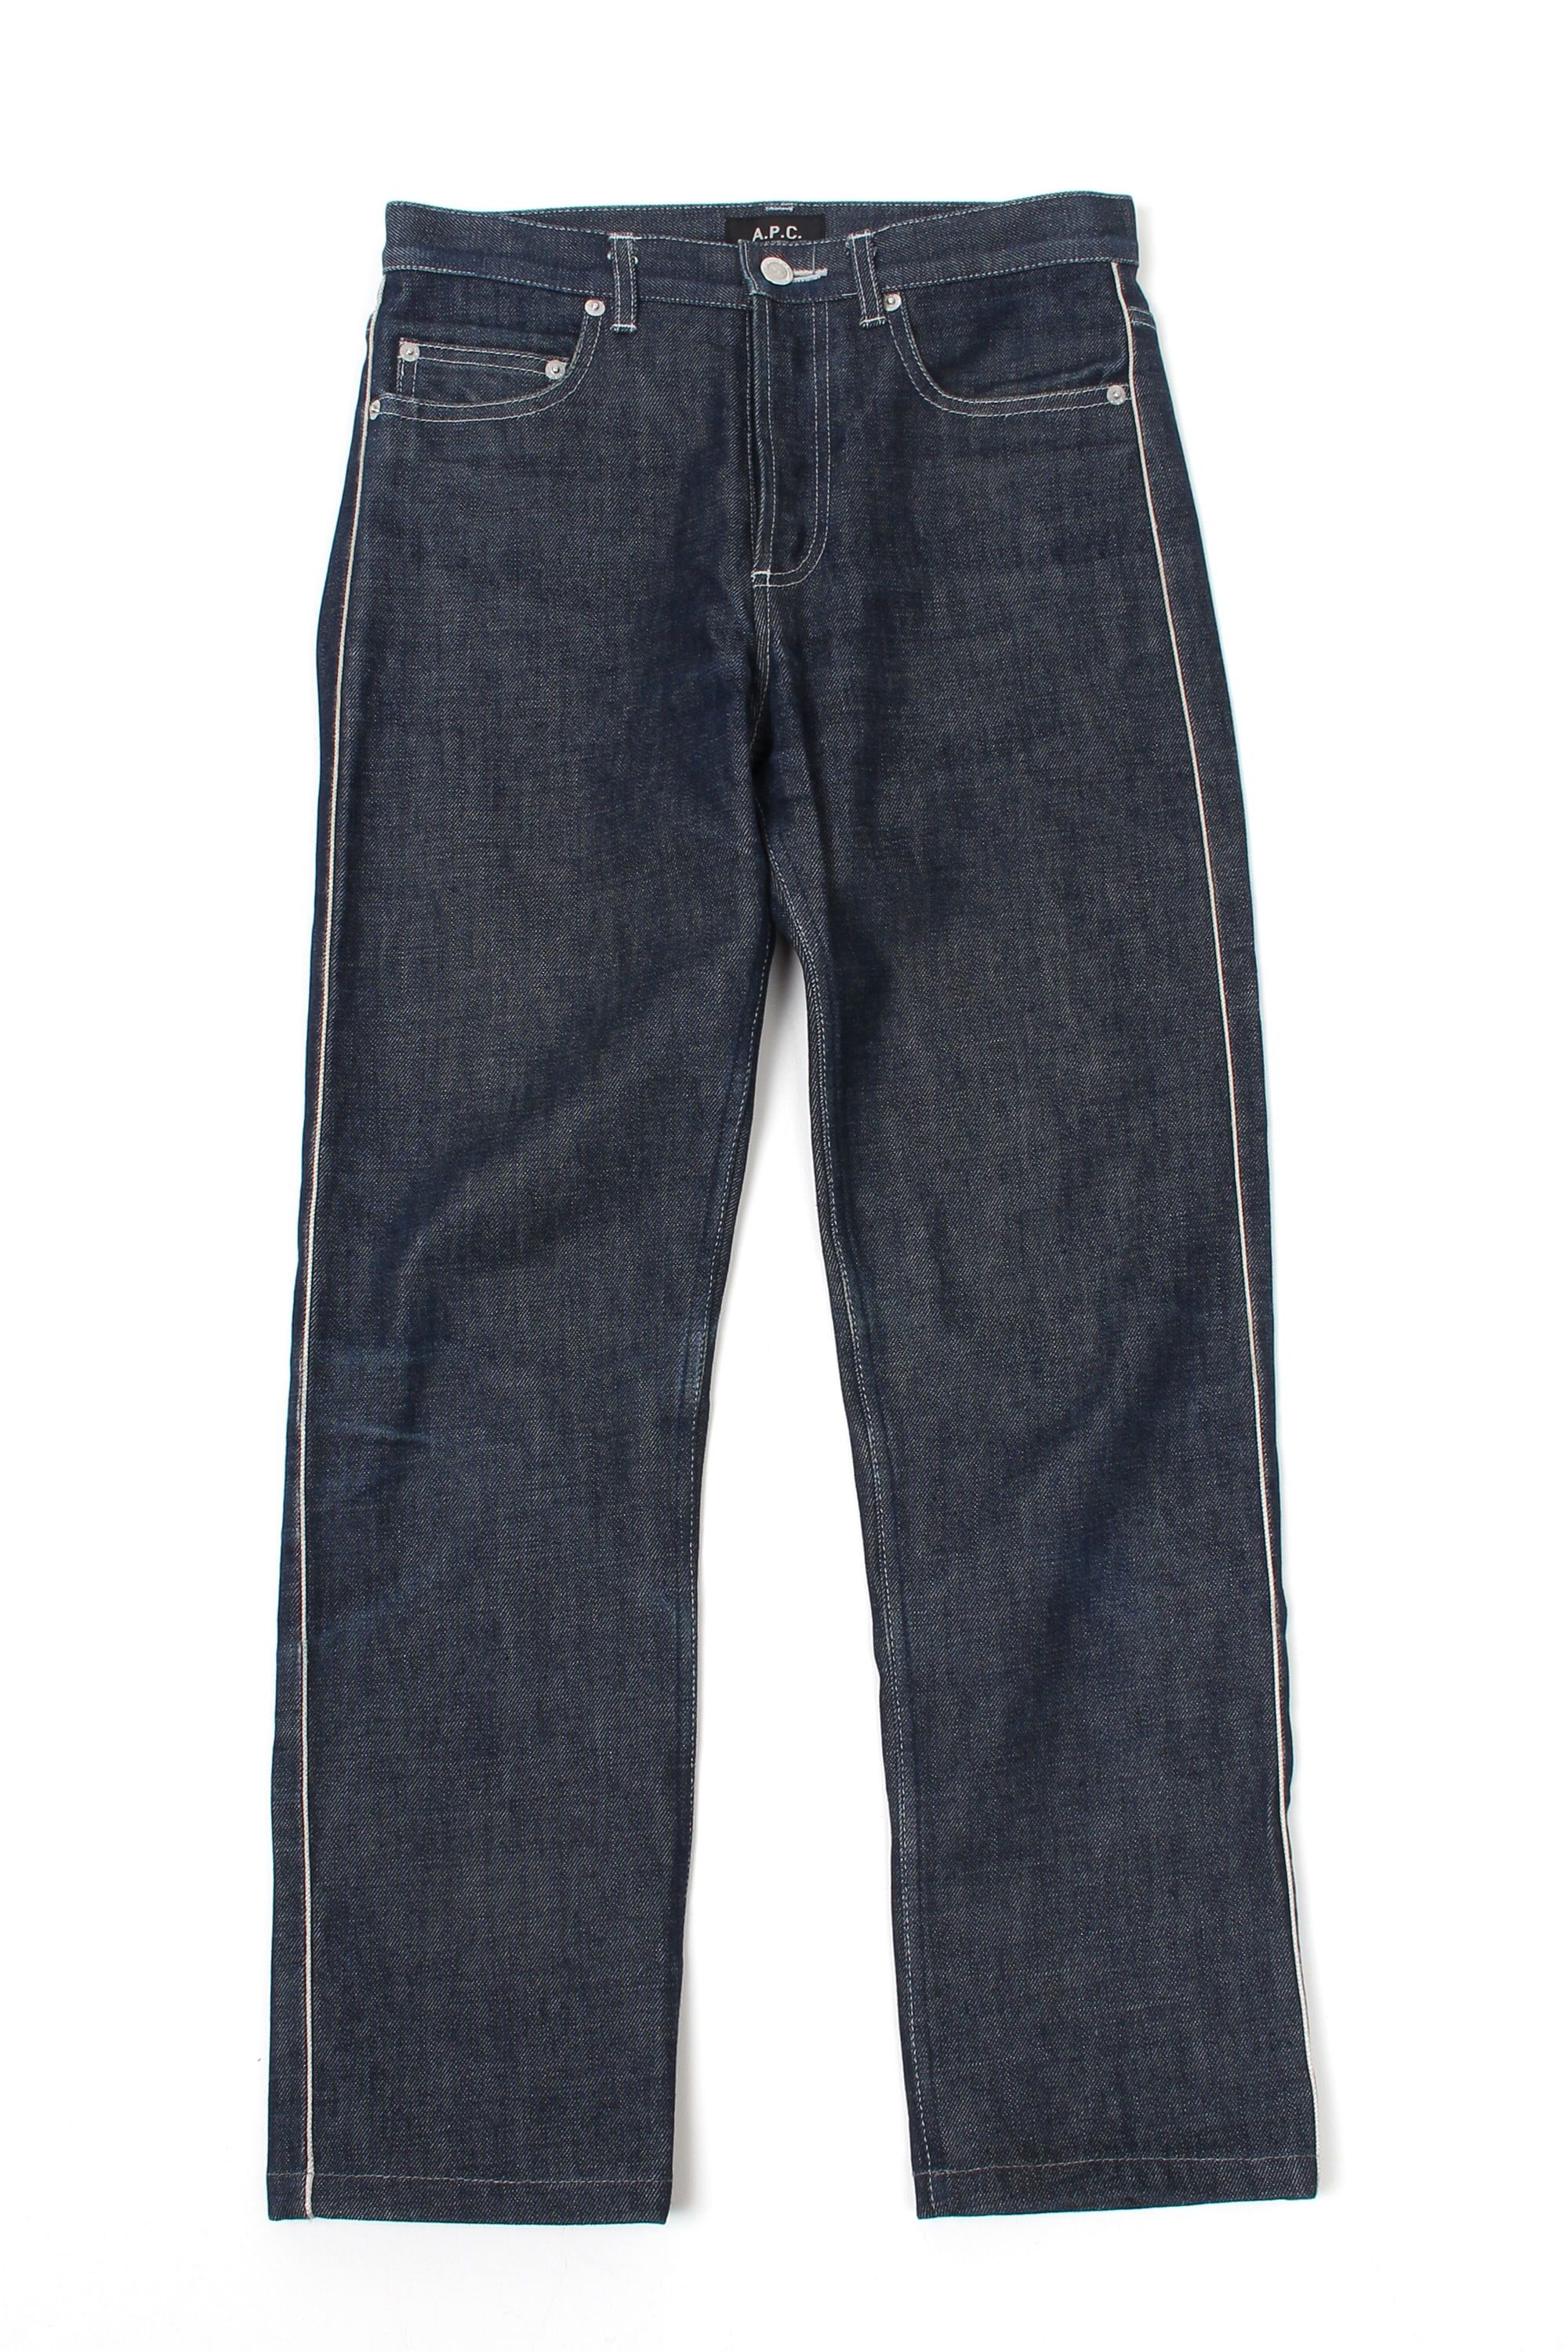 A.P.C Piping Jeans